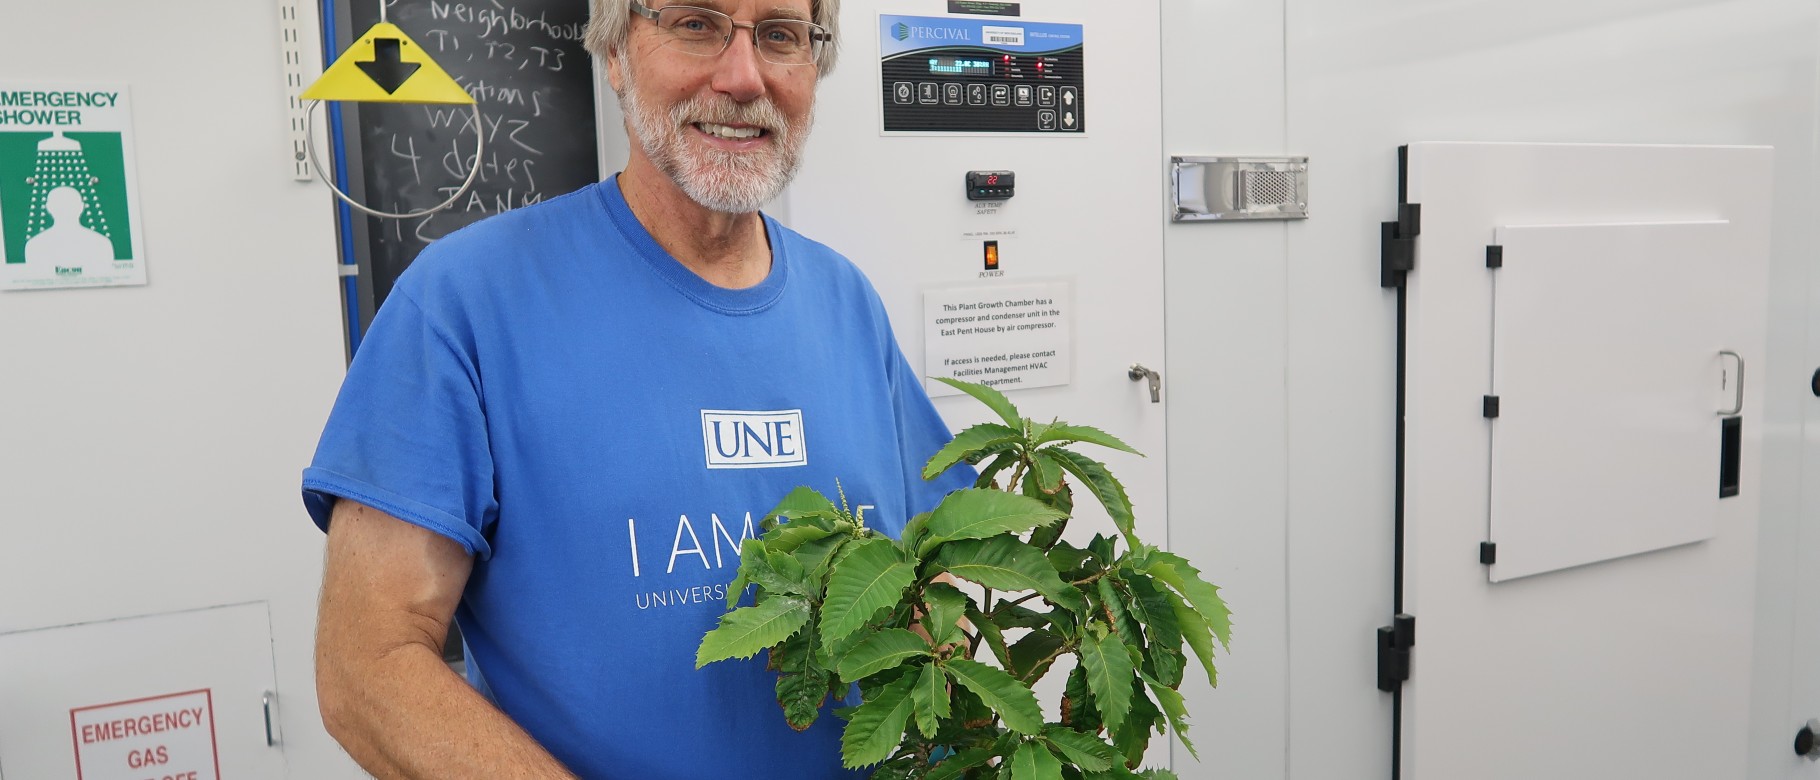 Thomas Klak was recently featured on 207 for his American chestnut tree restoration project